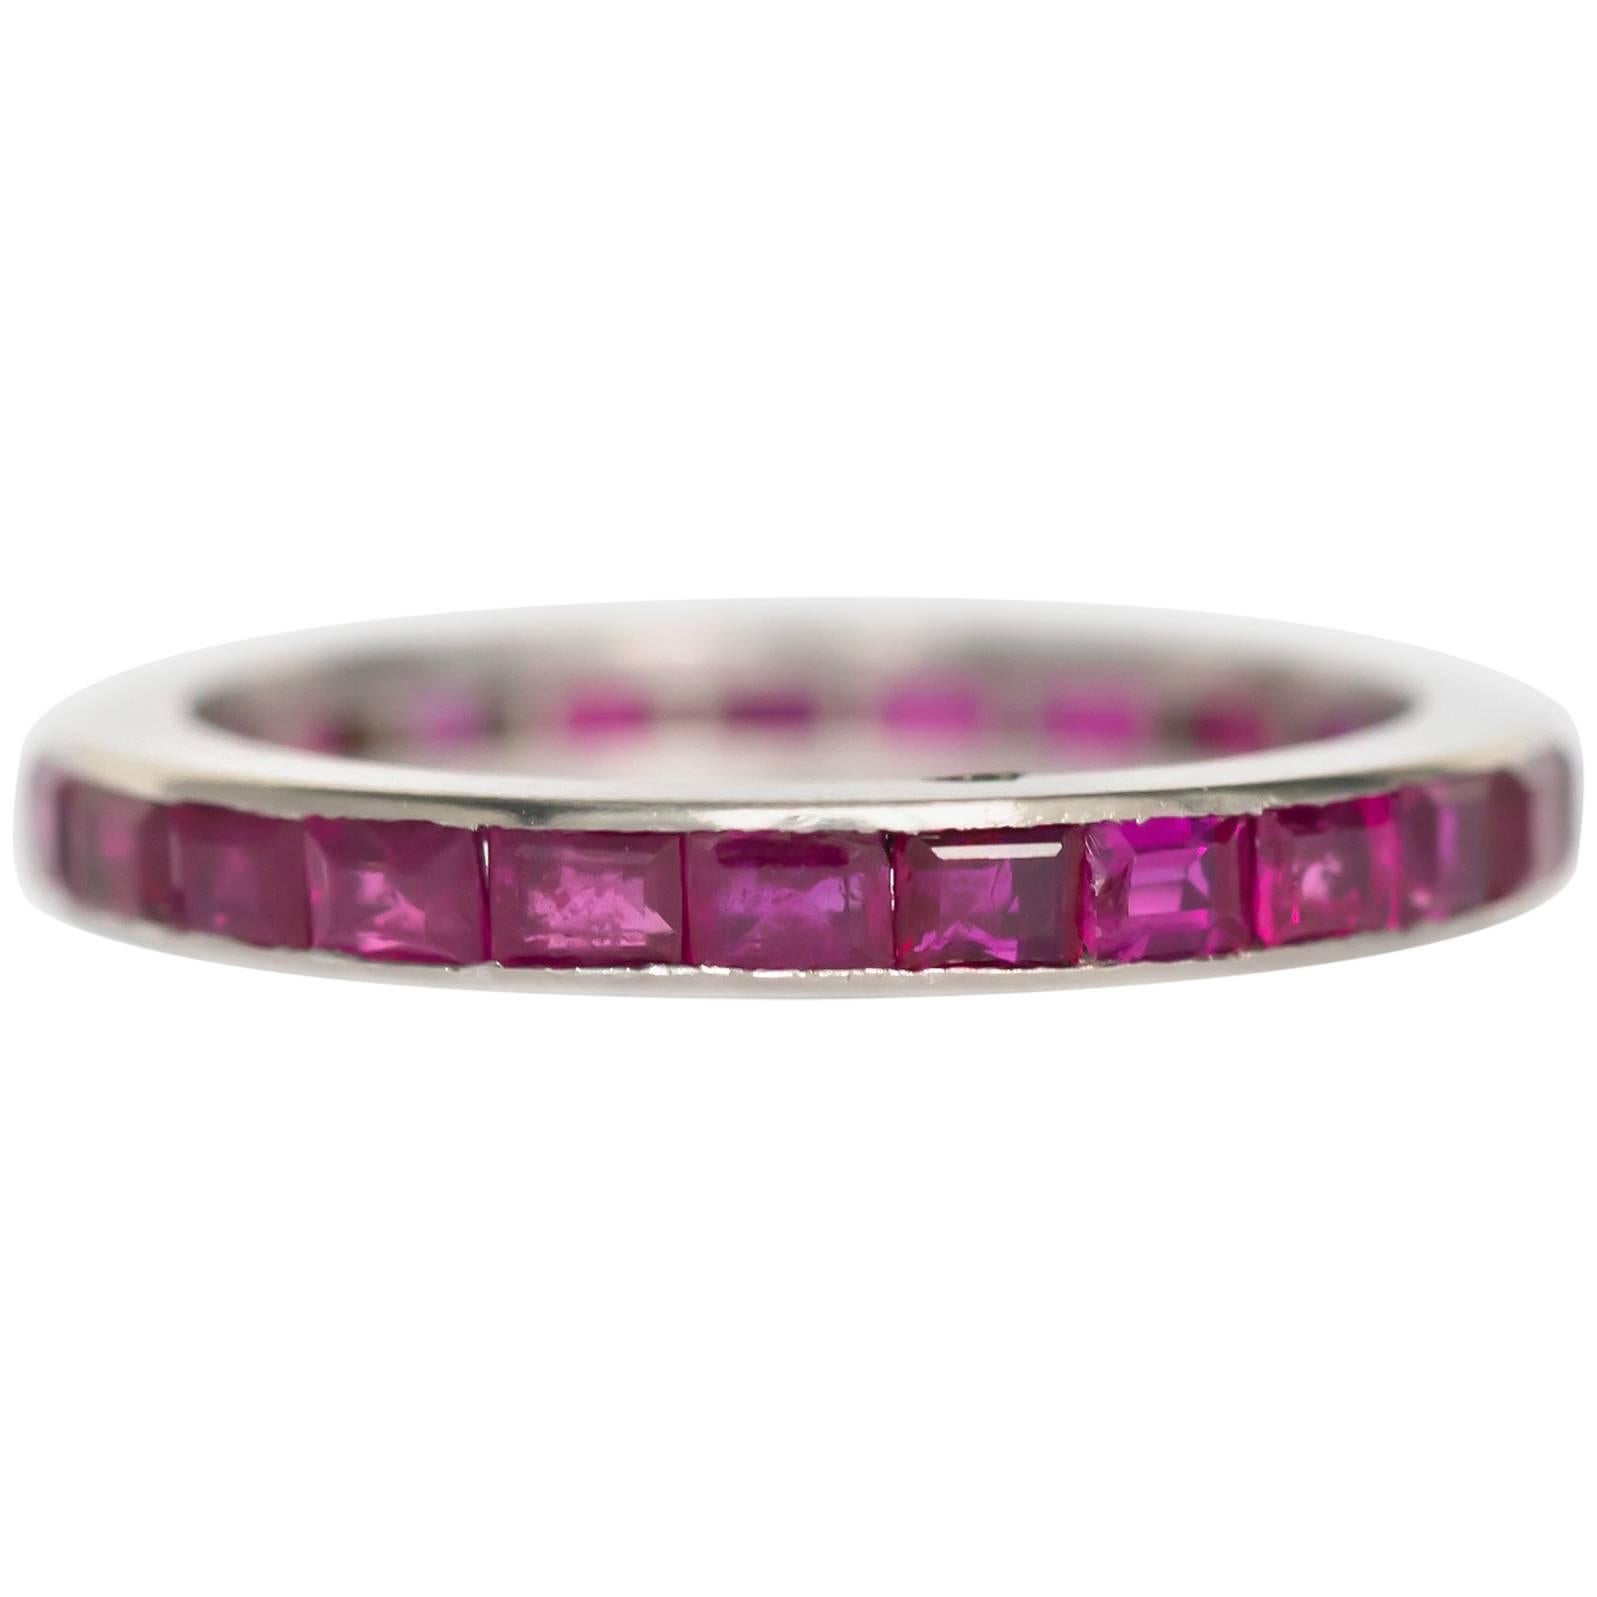 1940s Art Deco 1.50 Carat, Total Weight Ruby & 18K White Gold Wedding Band For Sale